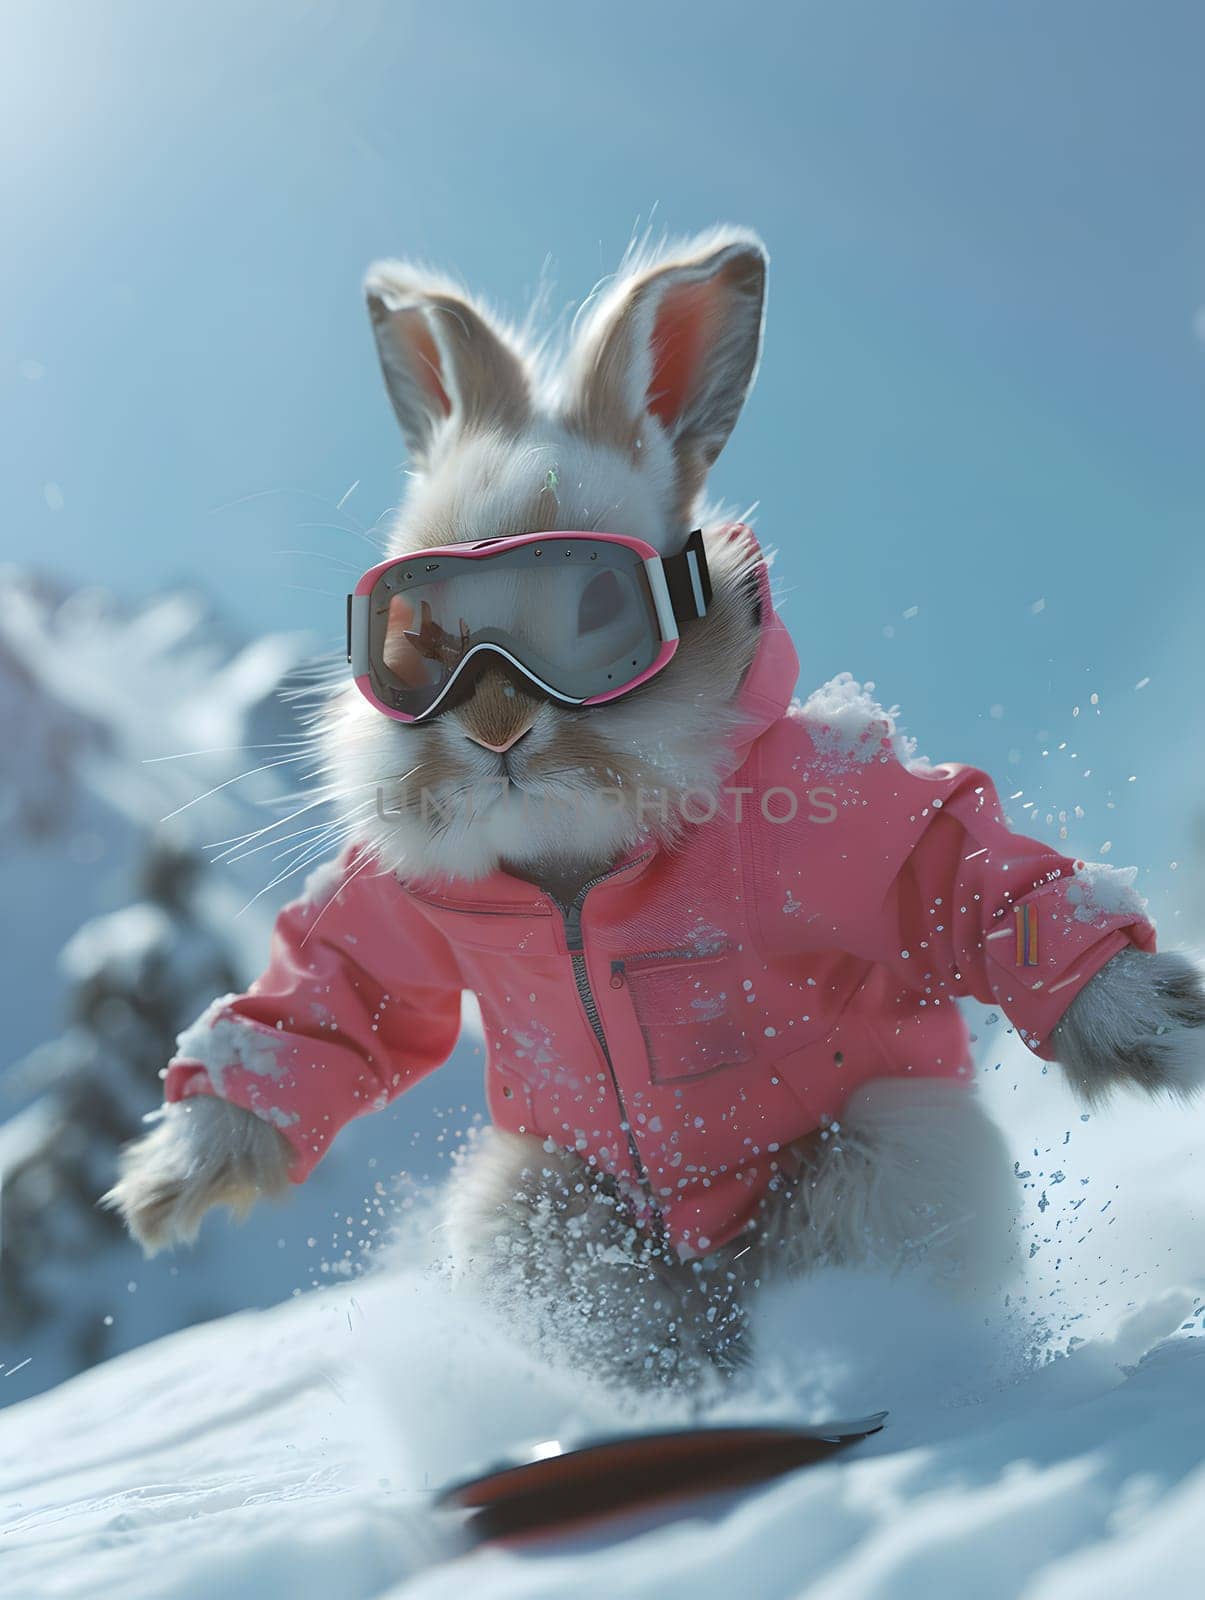 A bunny in goggles and a pink jacket snowboarding in snow by Nadtochiy